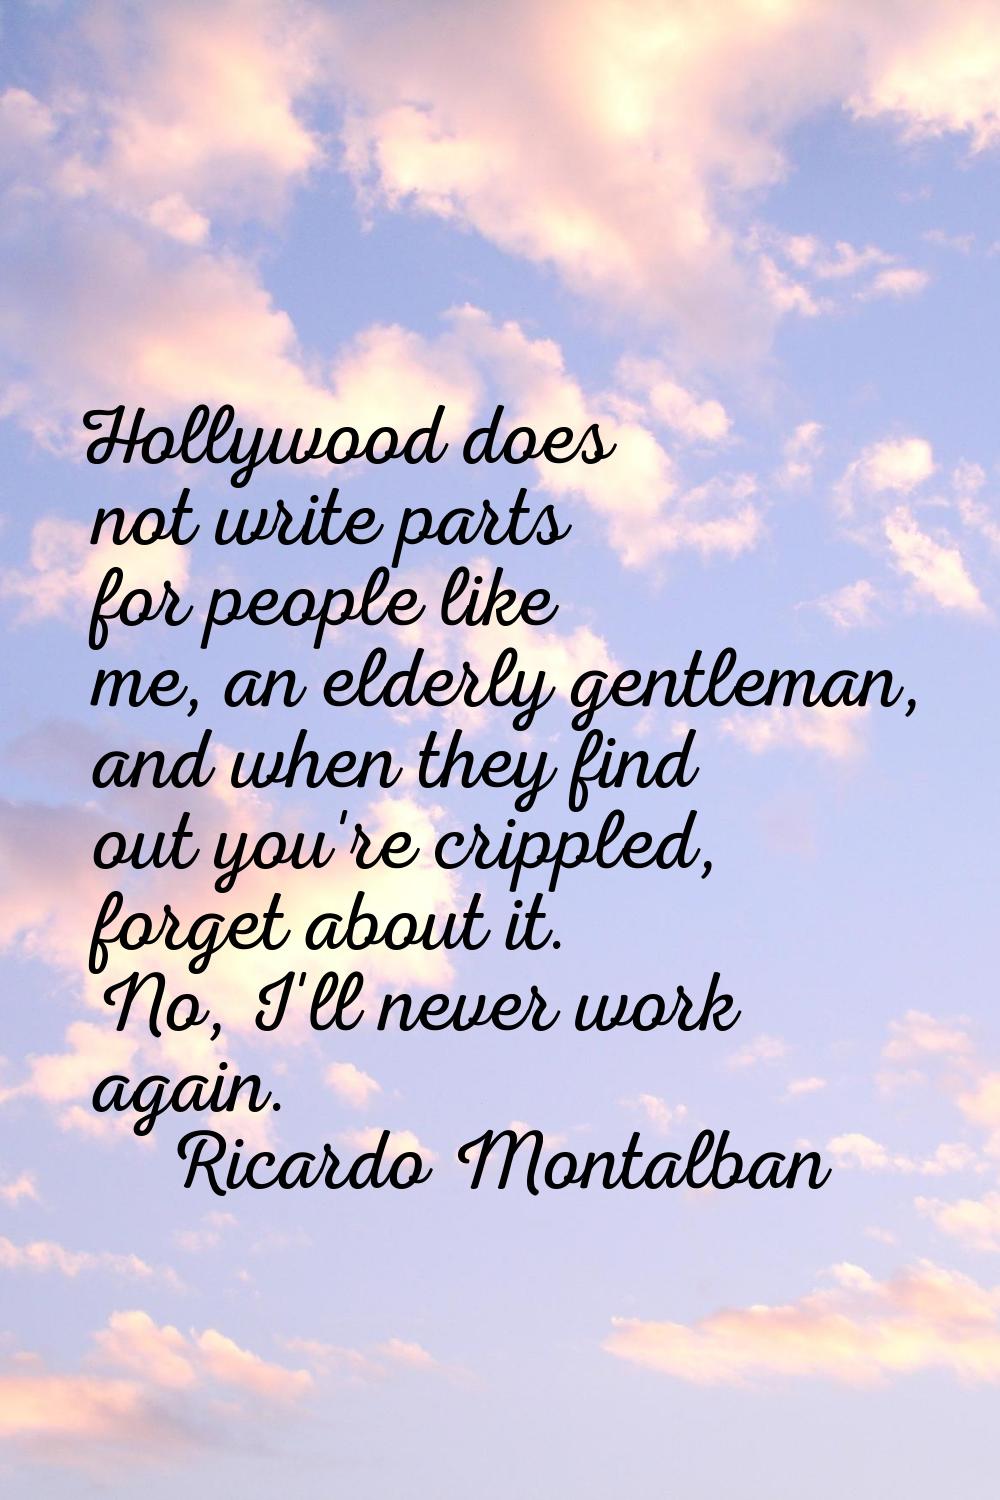 Hollywood does not write parts for people like me, an elderly gentleman, and when they find out you